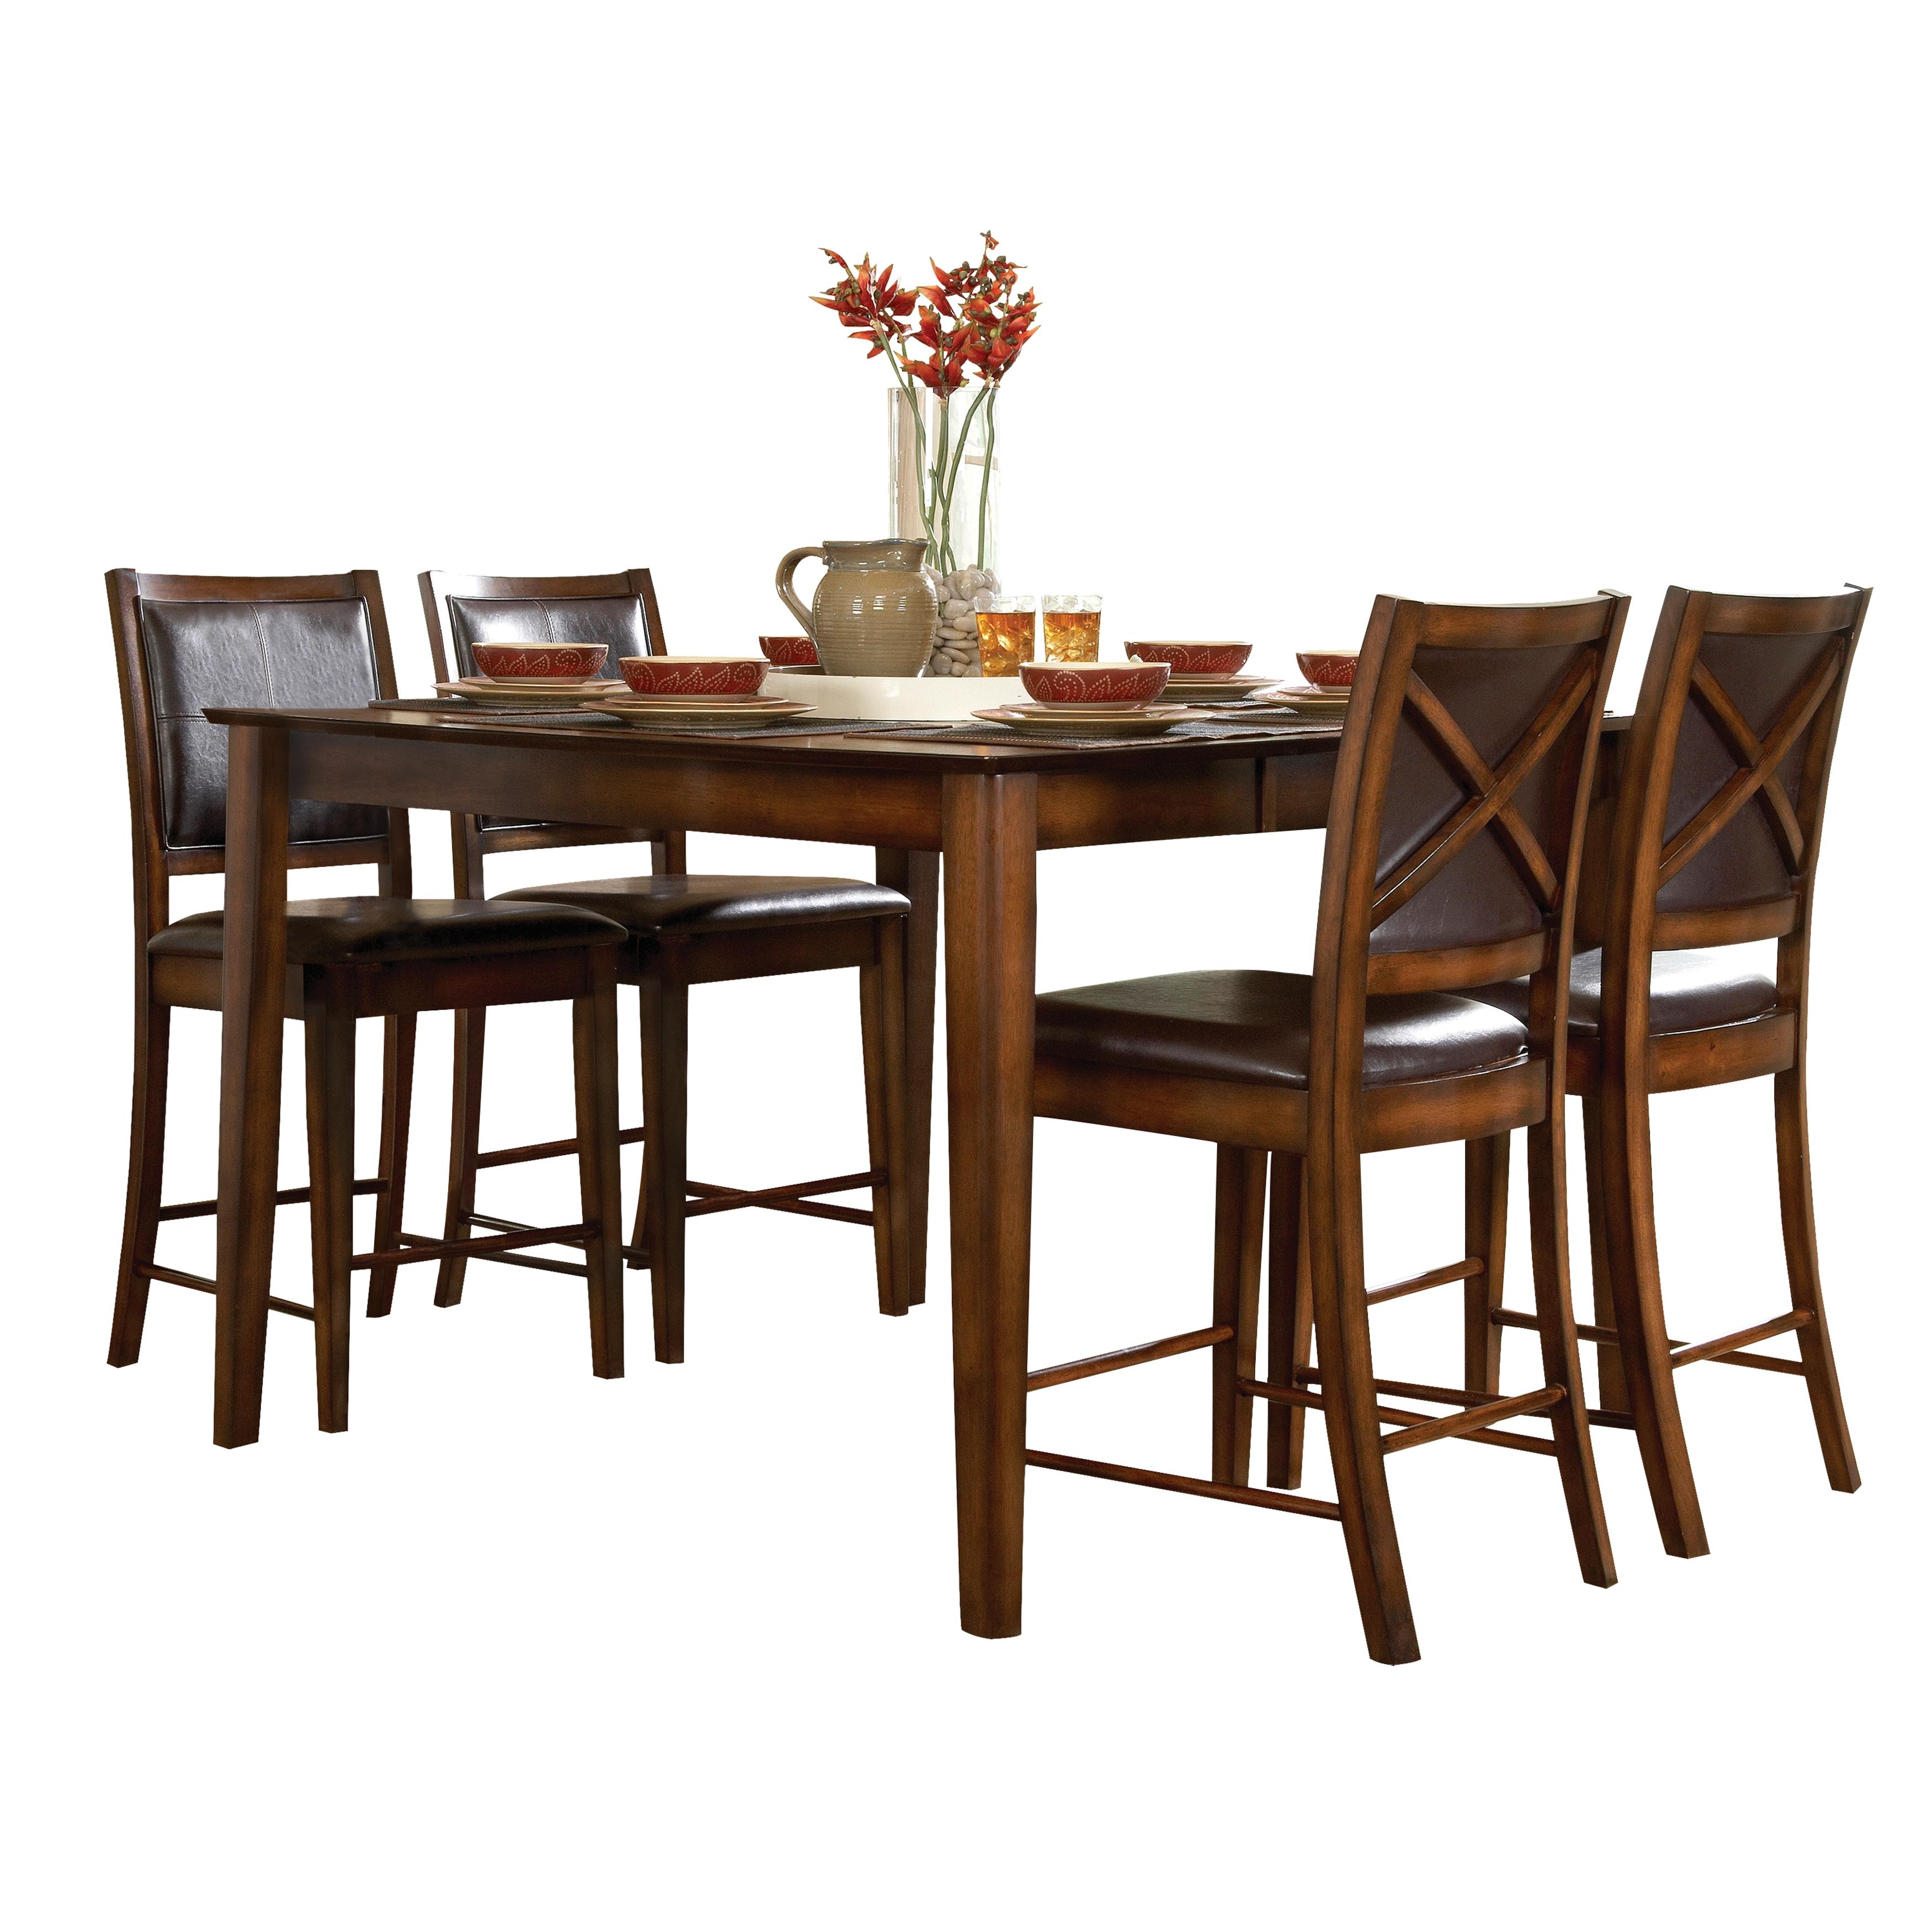 Modern Dining Room Set 727-36*5PC Verona 727-36*5PC in Amber Faux Leather